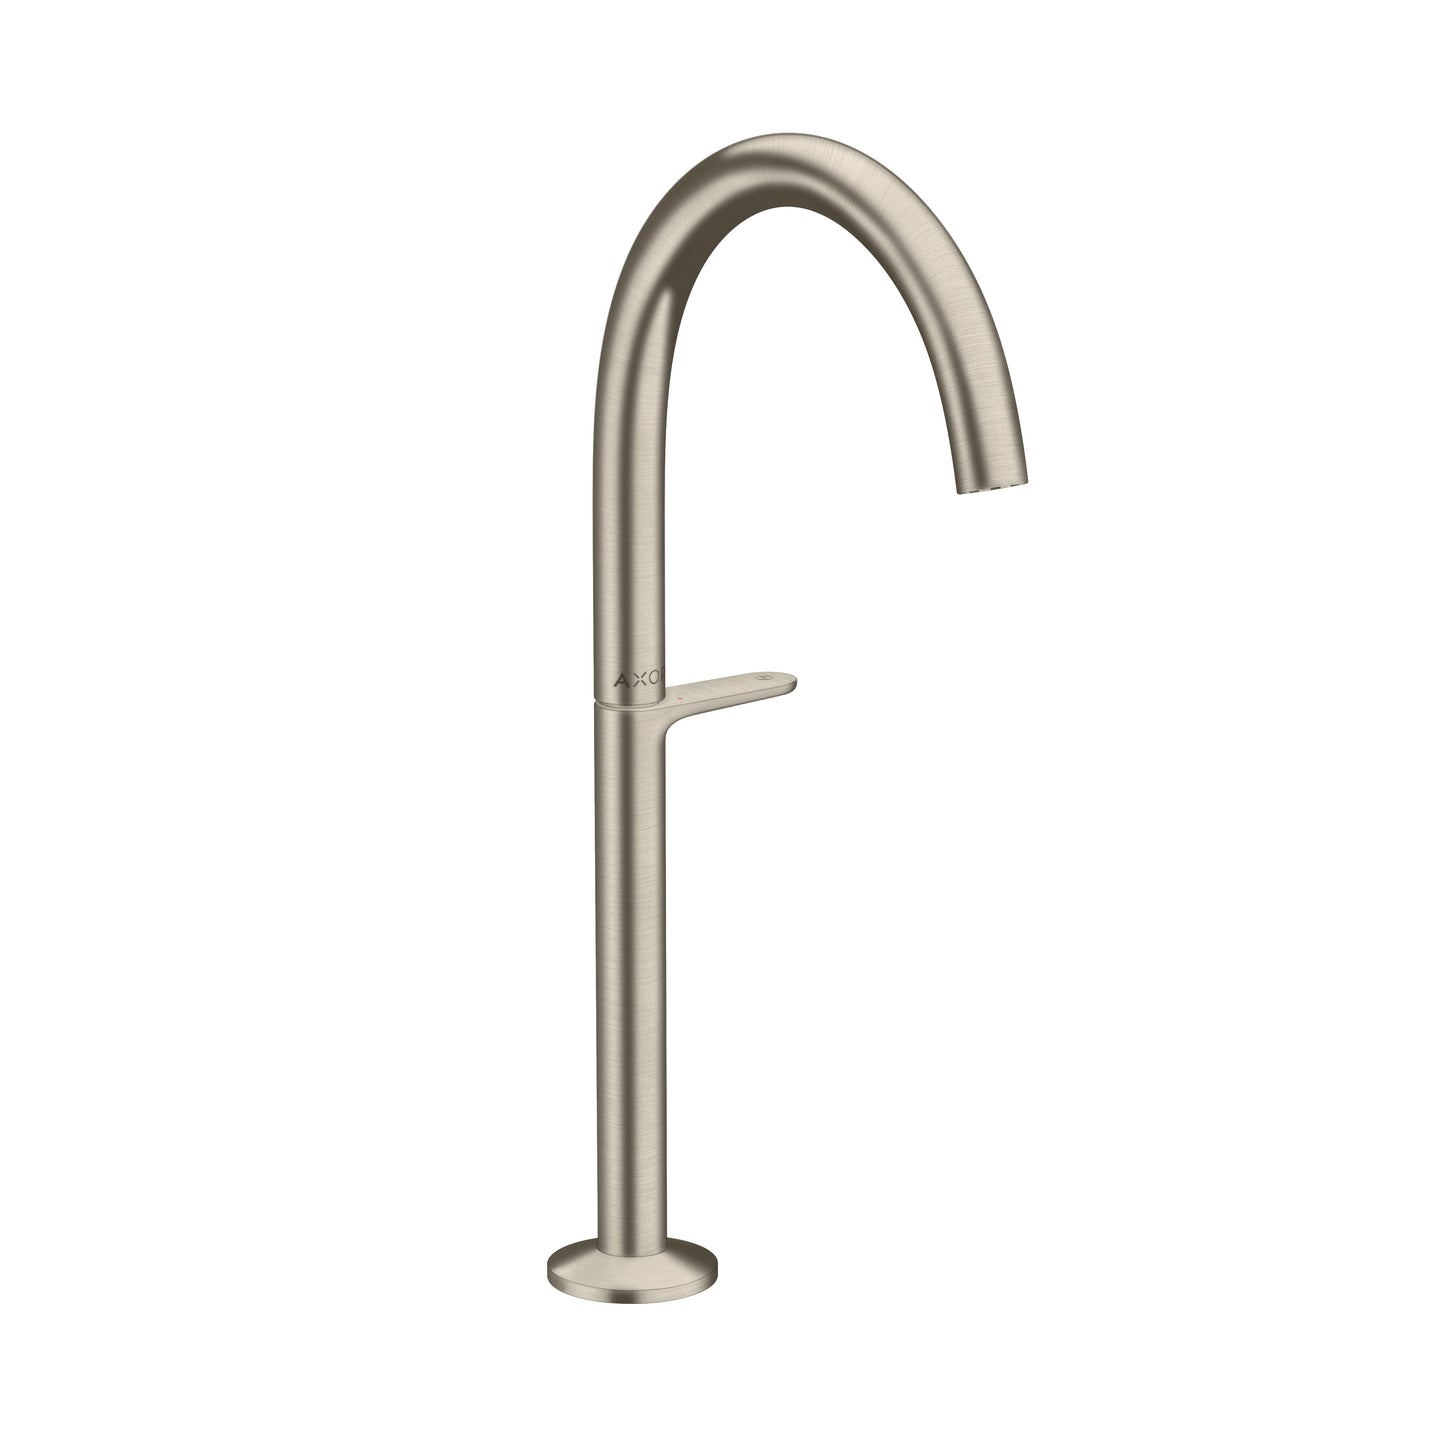 AXOR 48030821 Brushed Nickel ONE Modern Single Hole Bathroom Faucet 1.2 GPM